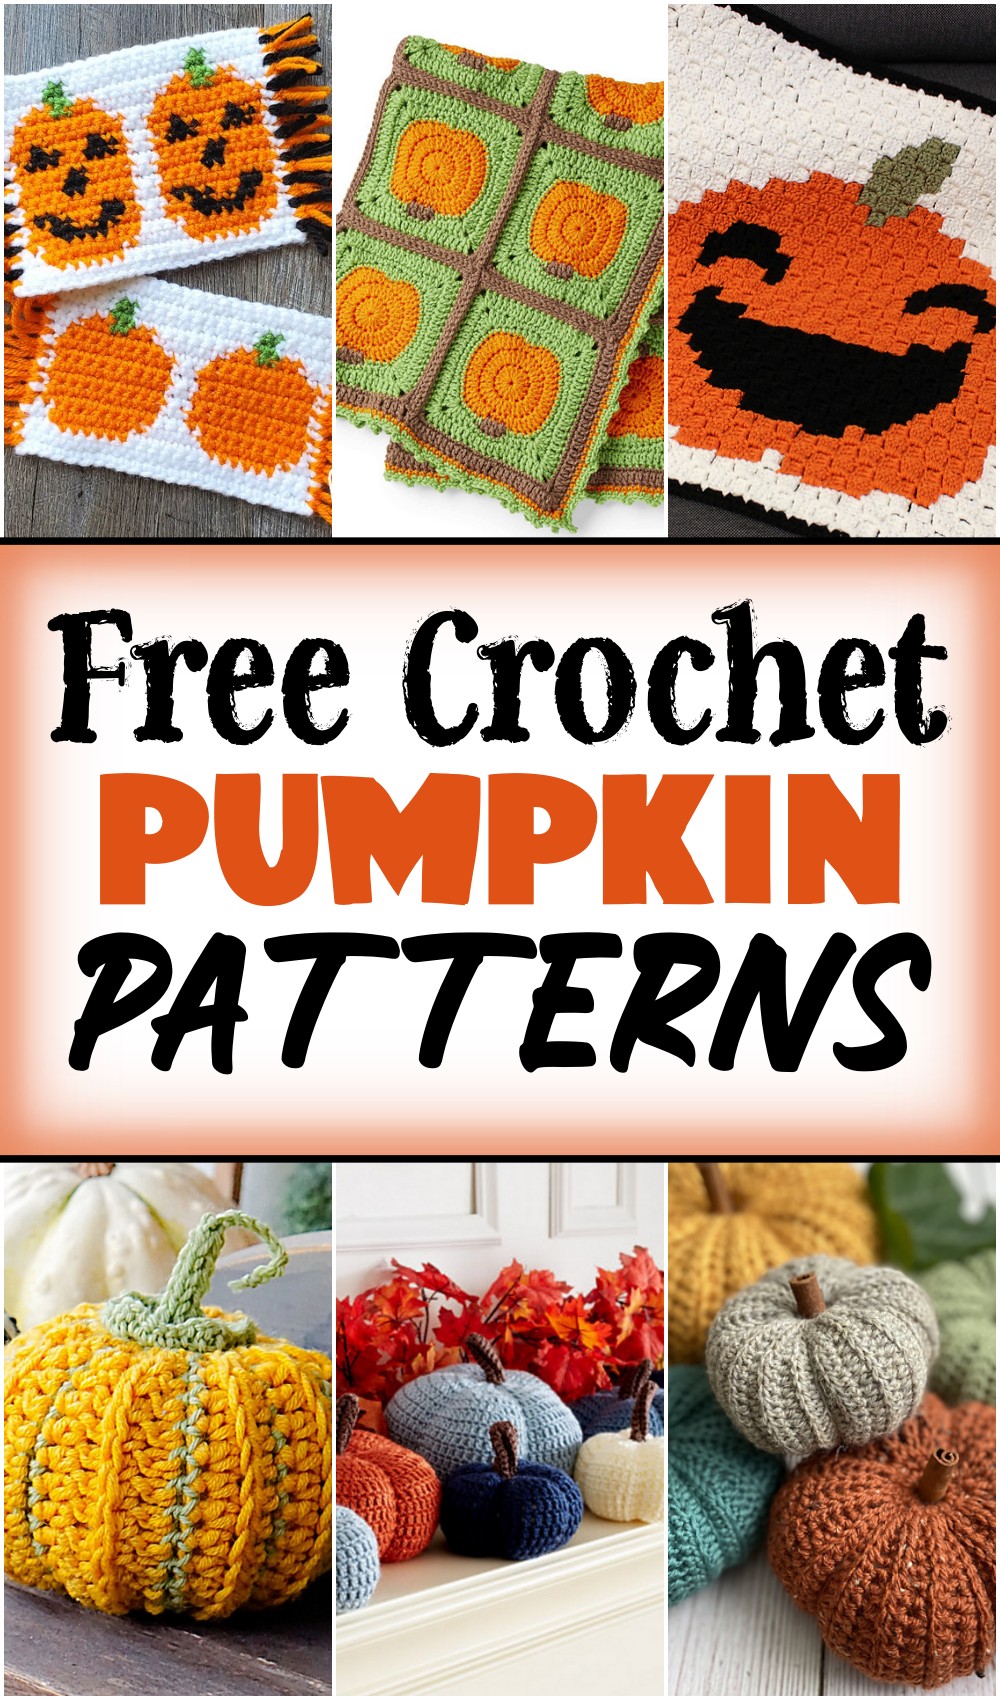 20 Crochet Pumpkin Patterns For Decor, Playing And Cozy Items